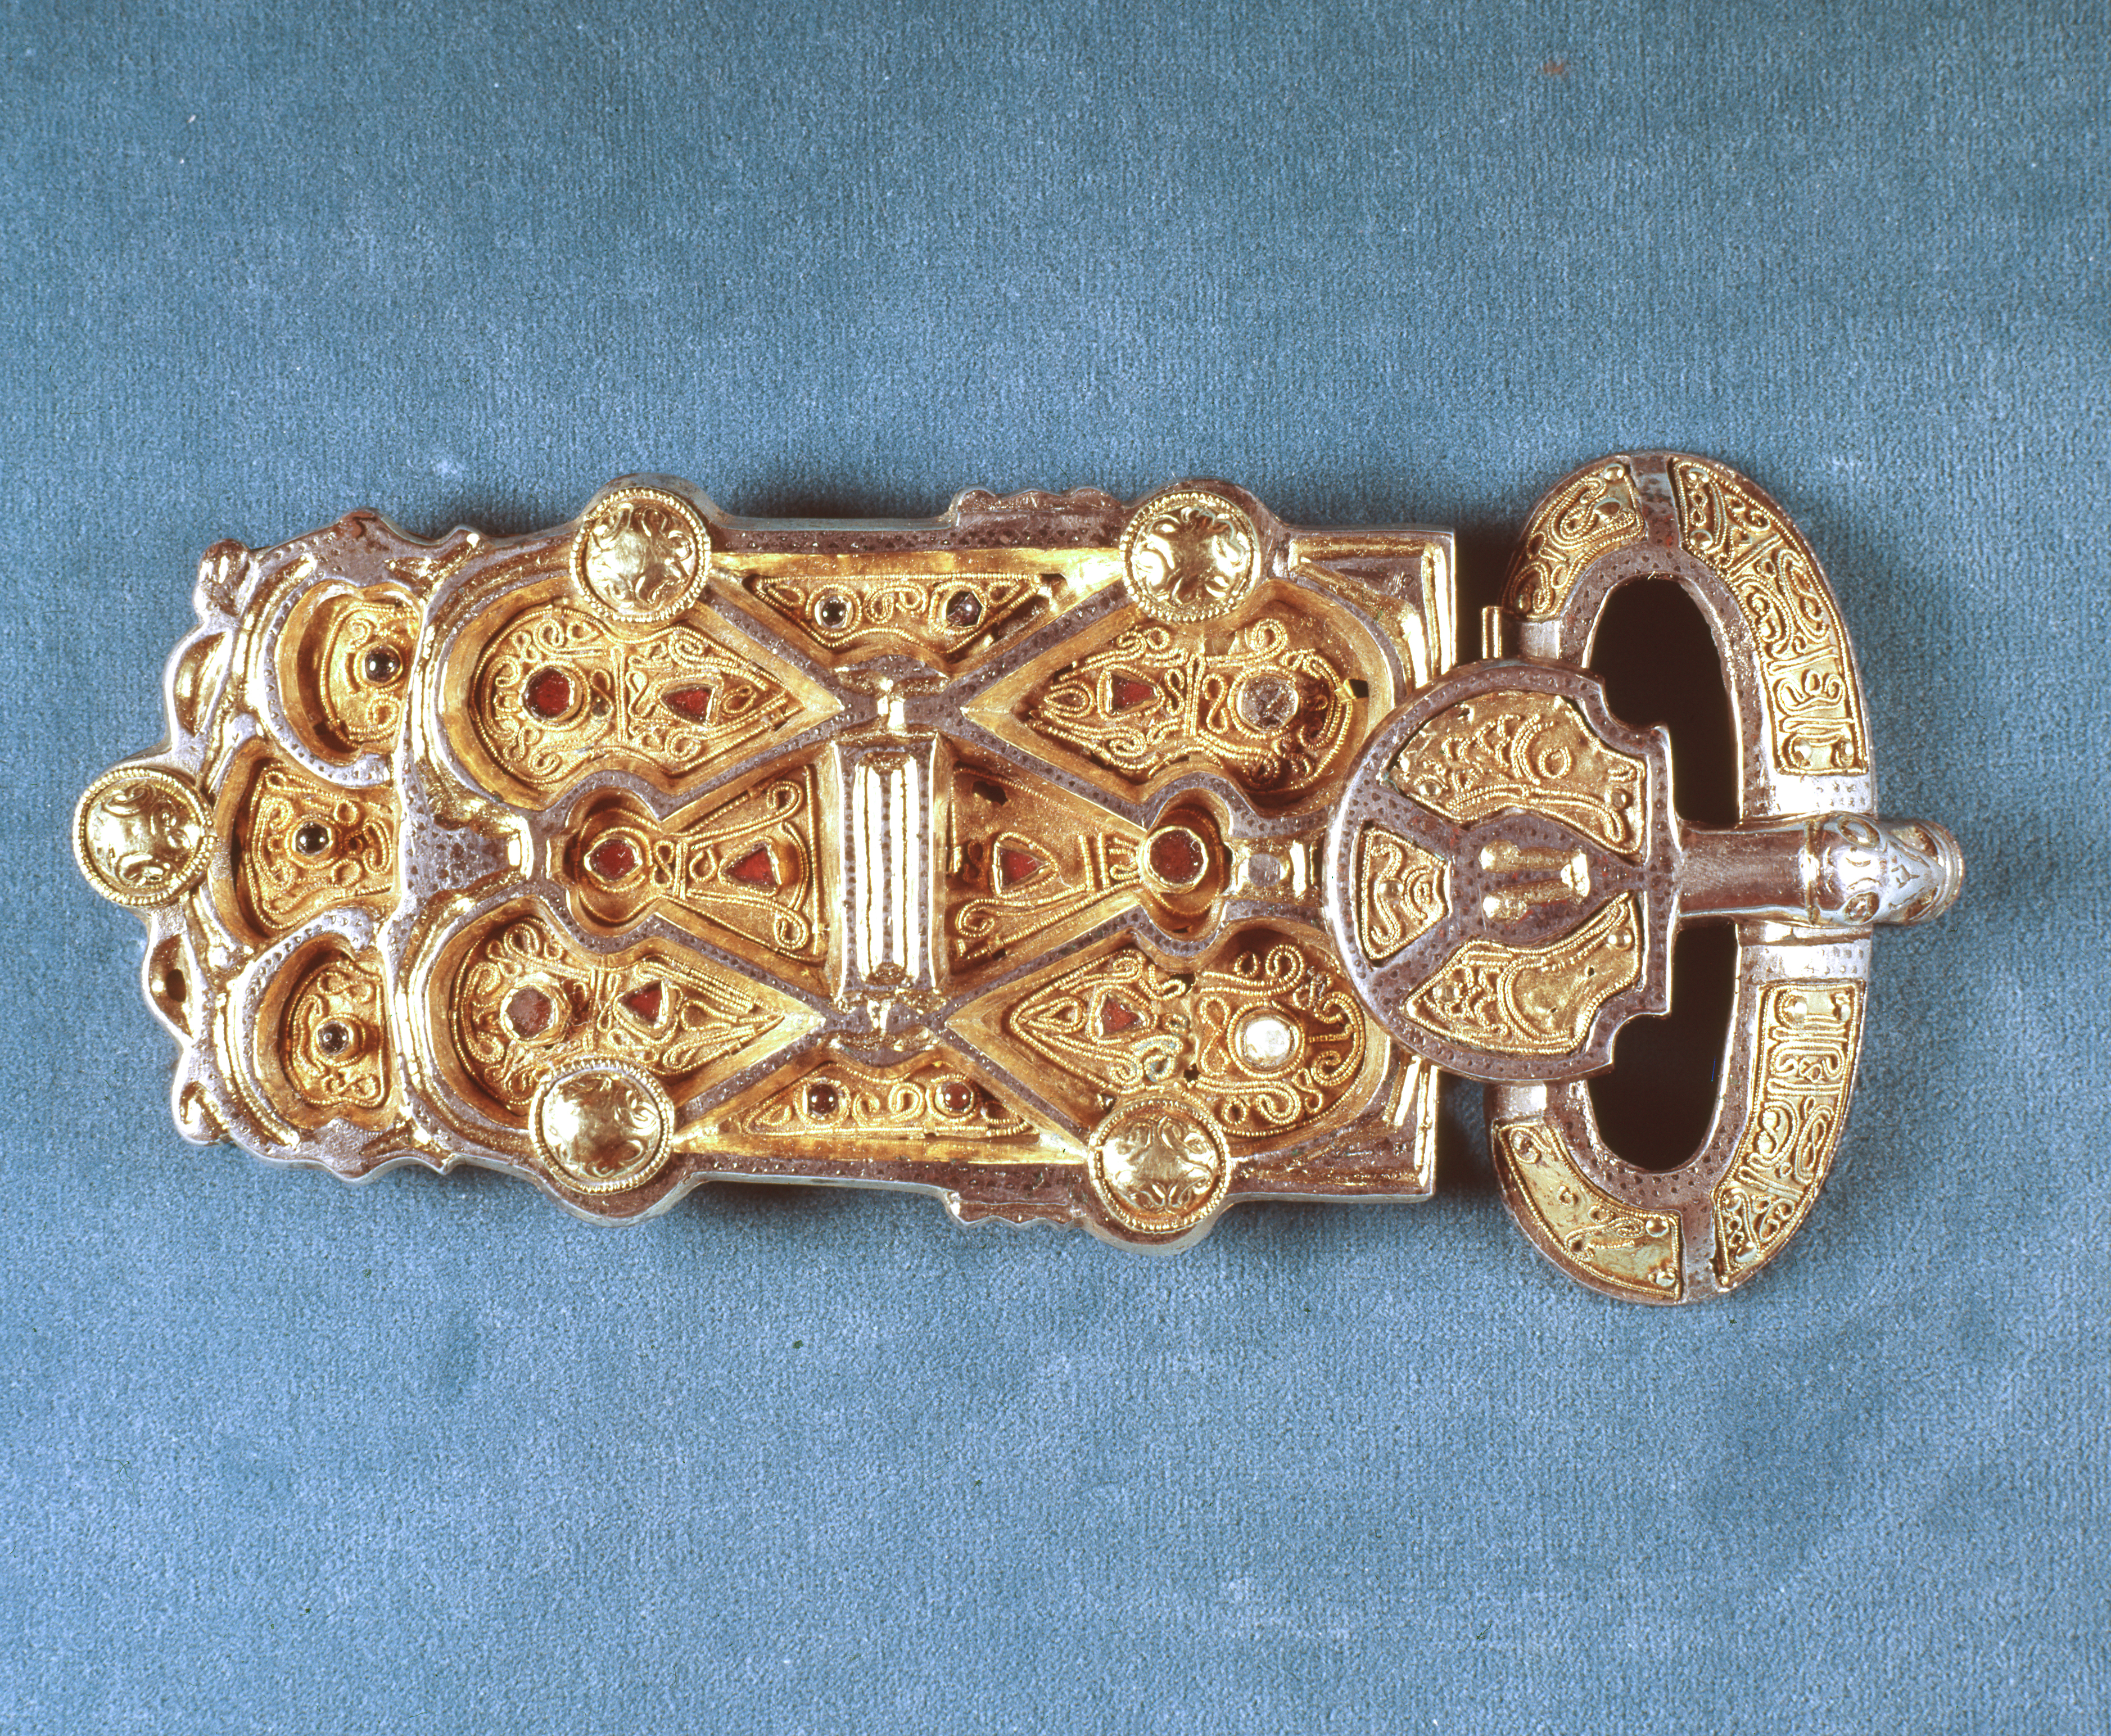 Buckle plate from a jeweled belt belonging to a Merovingian woman of high status, constructed of silver, plate glass, and garnet